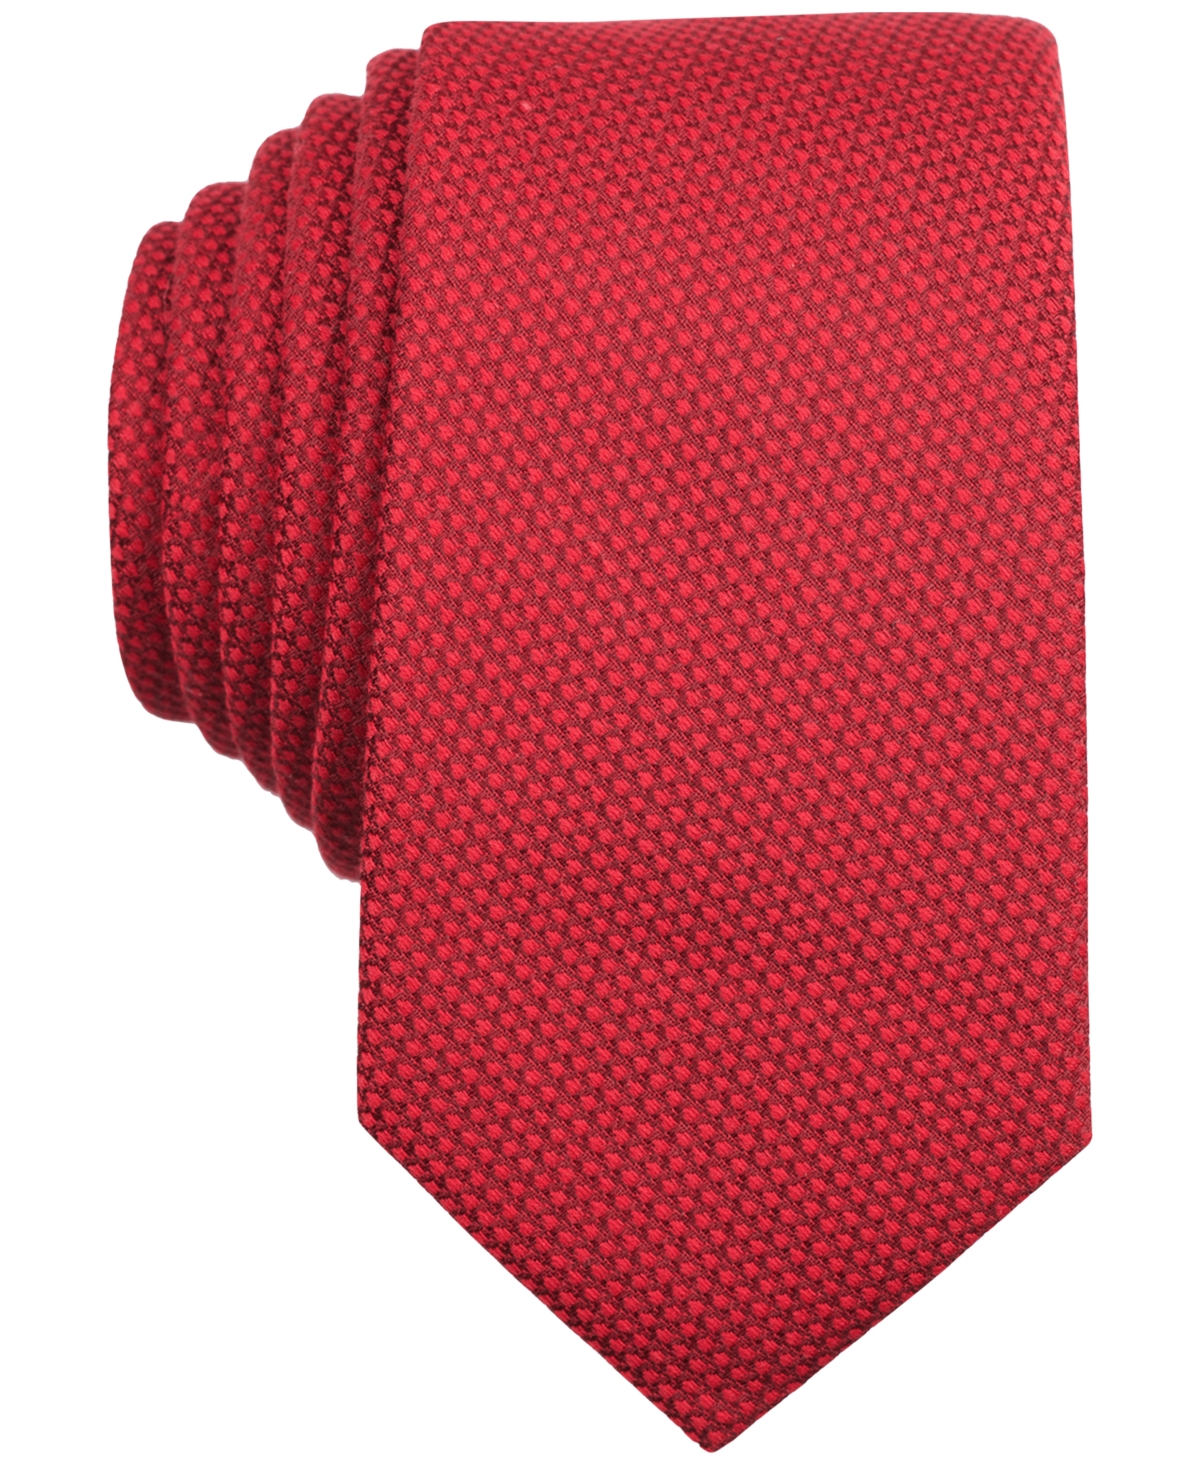 Solid Knit Skinny Tie - Red